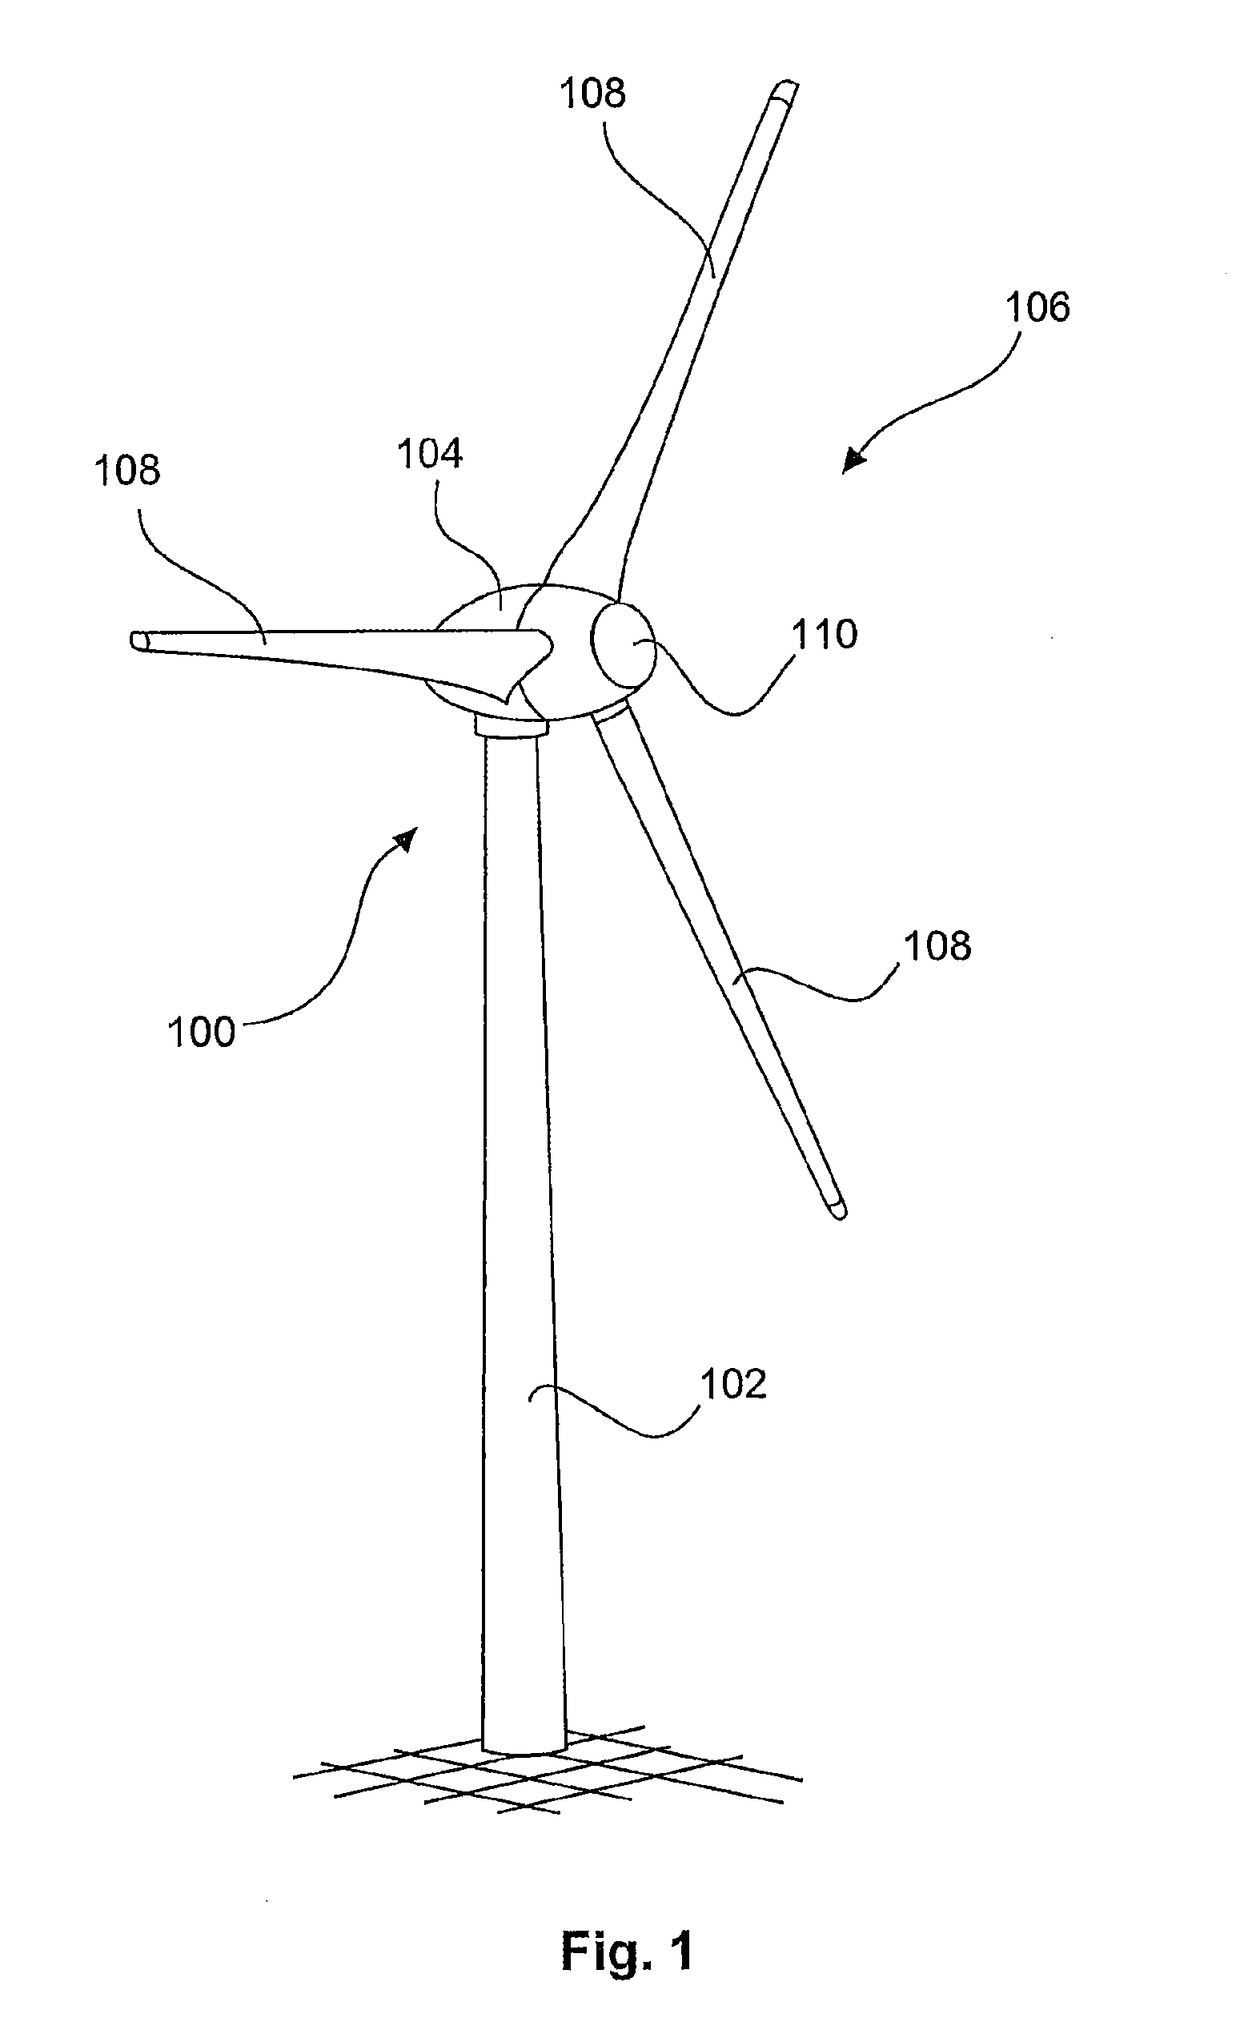 Method for feeding electric power into a supply grid